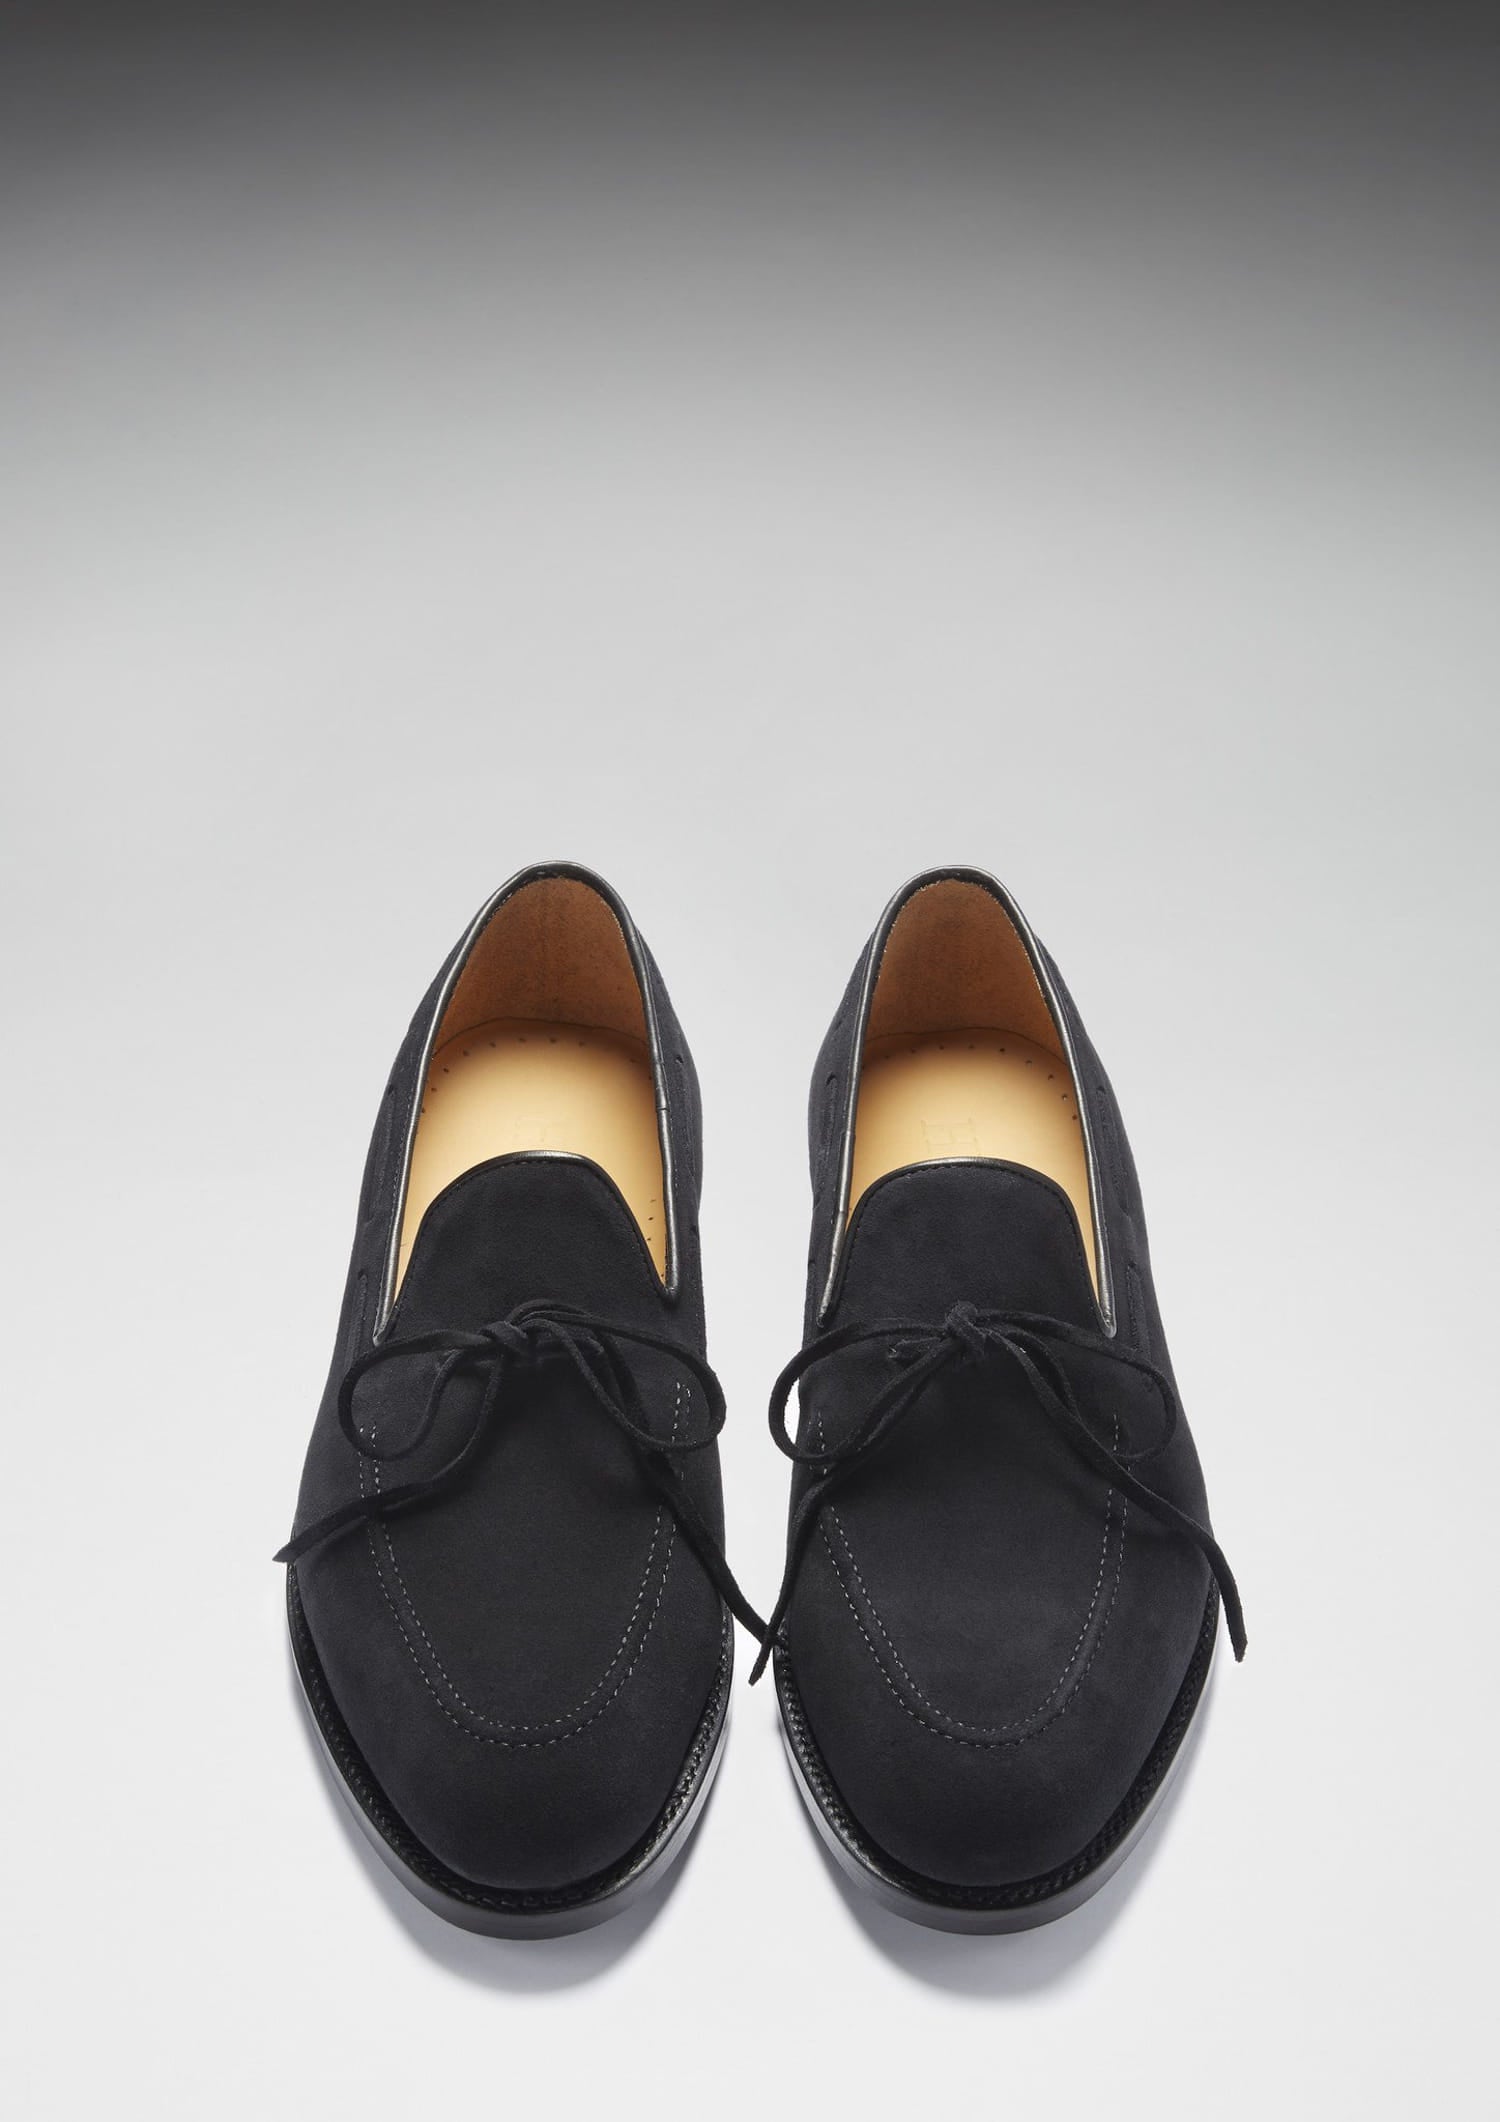 Black Suede Laced Loafers, Welted Leather Sole